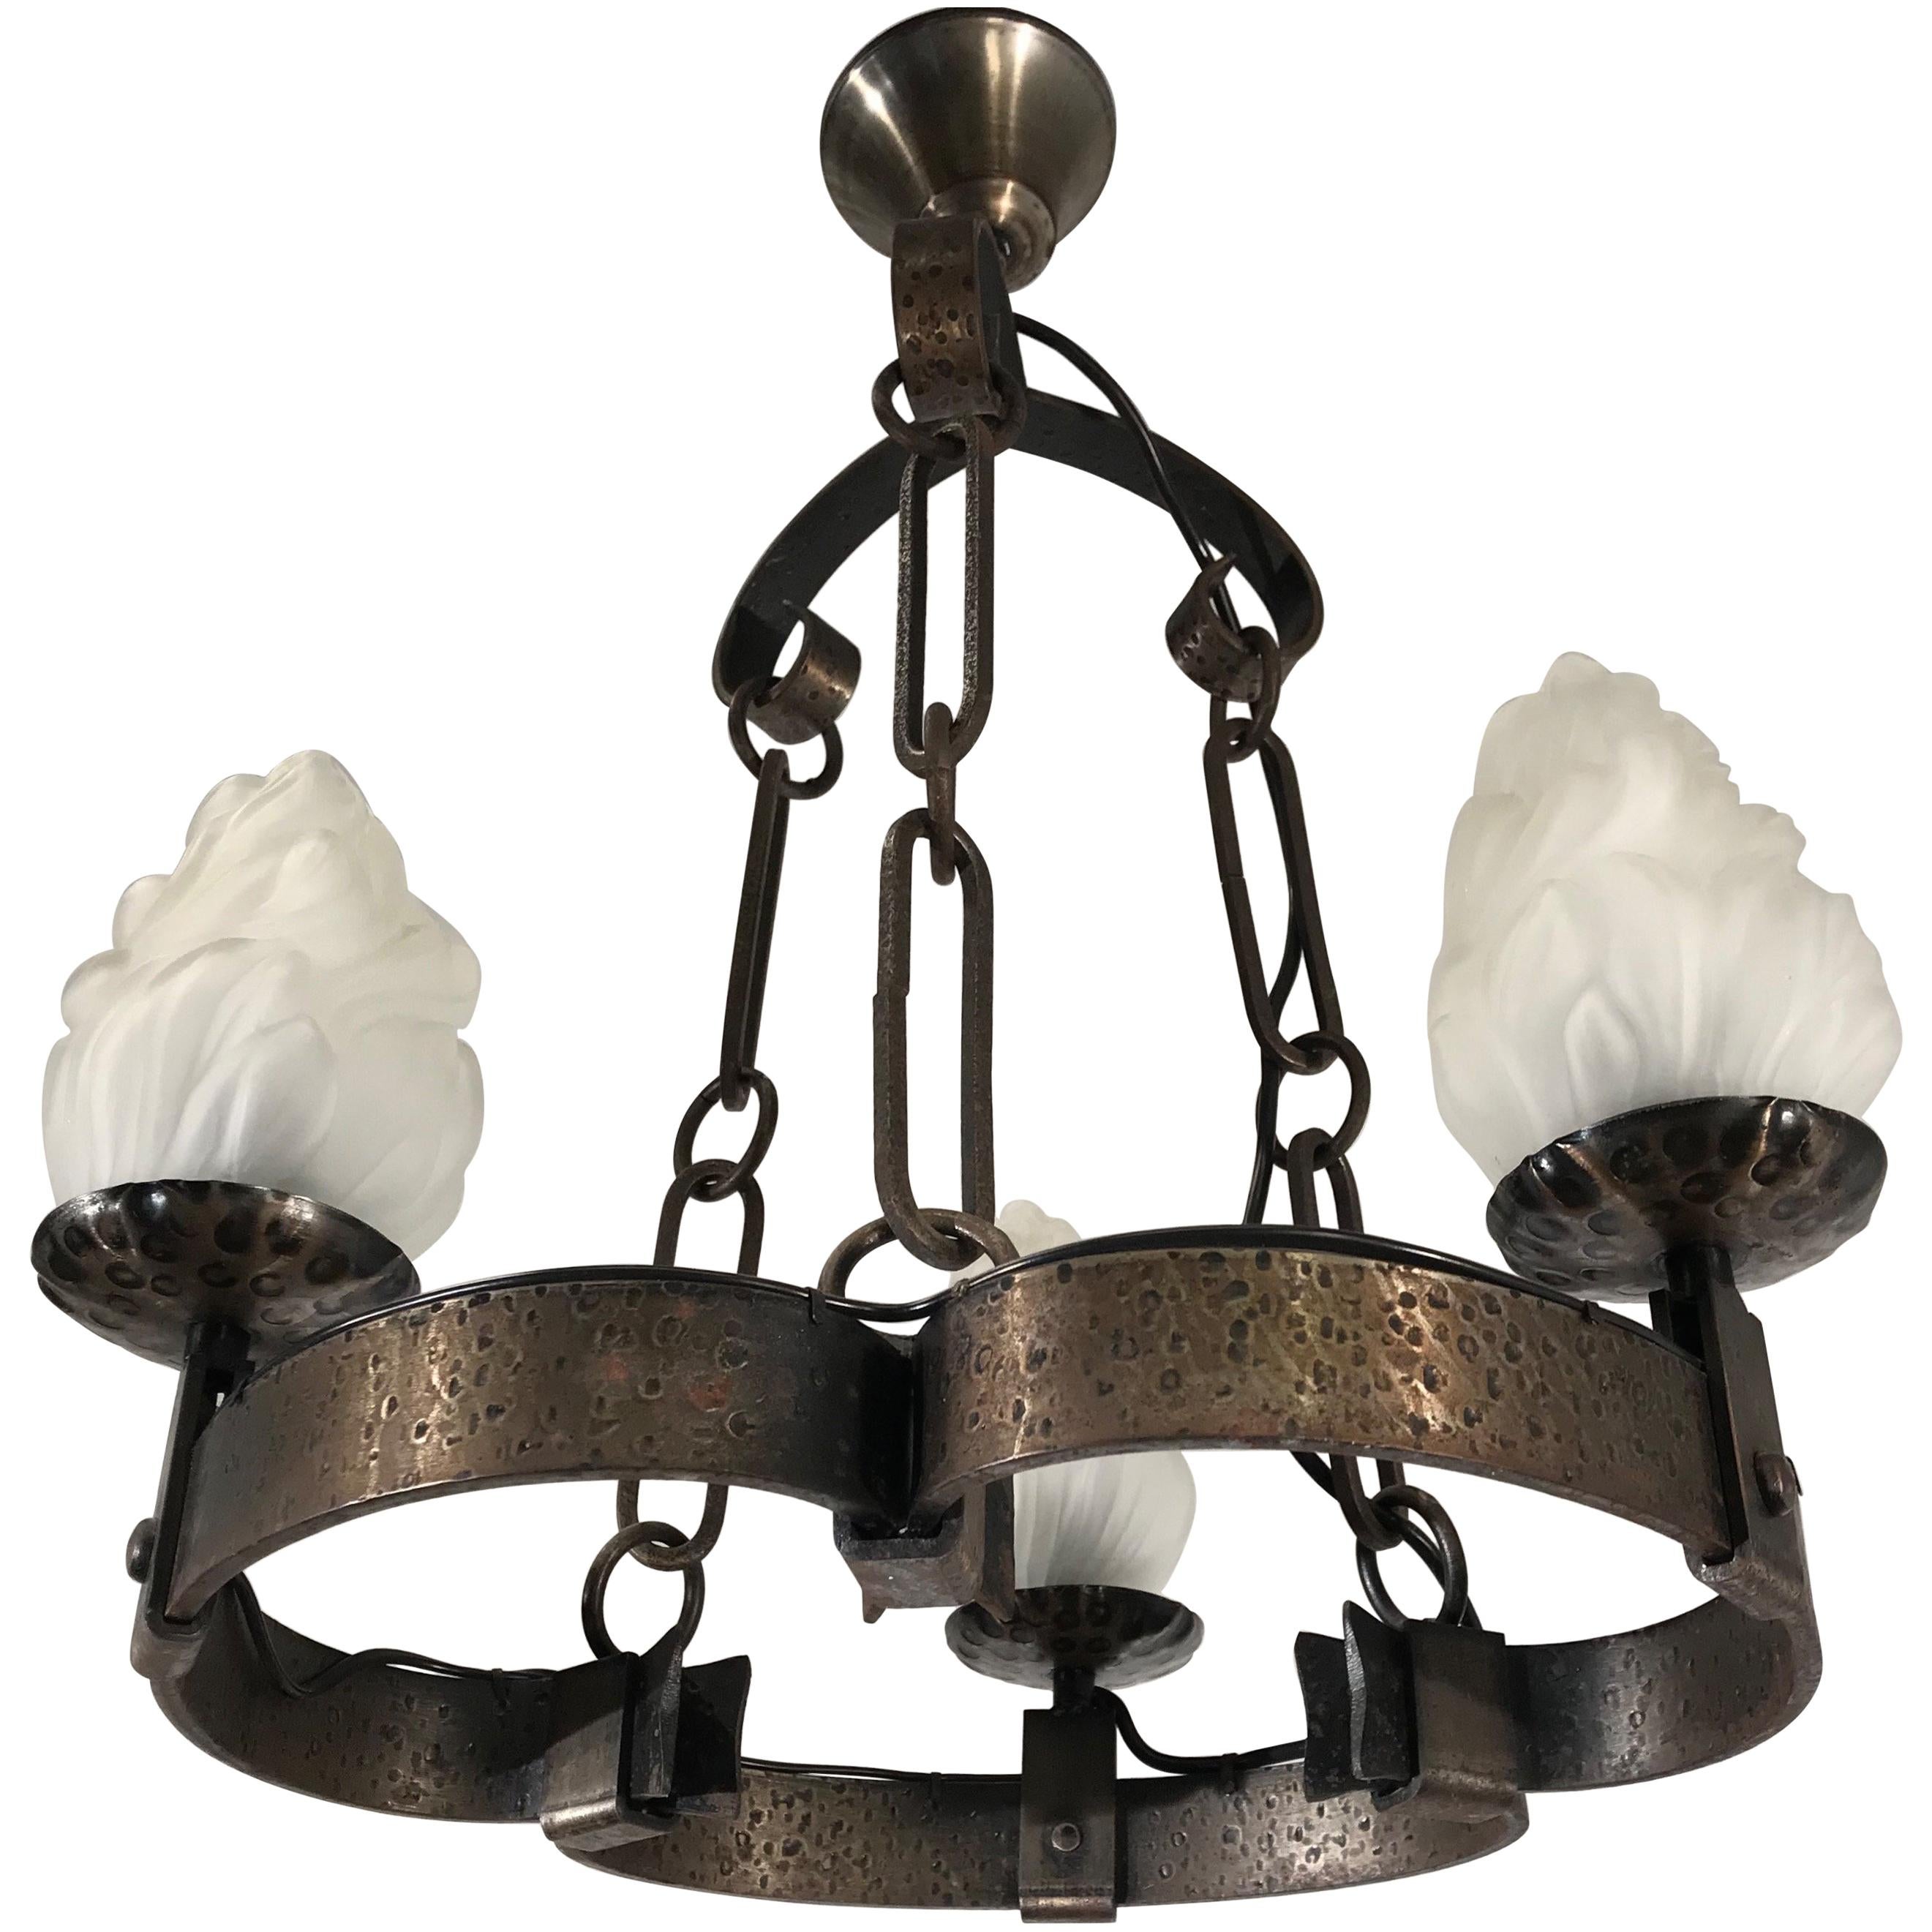 Arts & Crafts Hand-Hammered Wrought Iron Castle or Wine Cellar Pendant Light